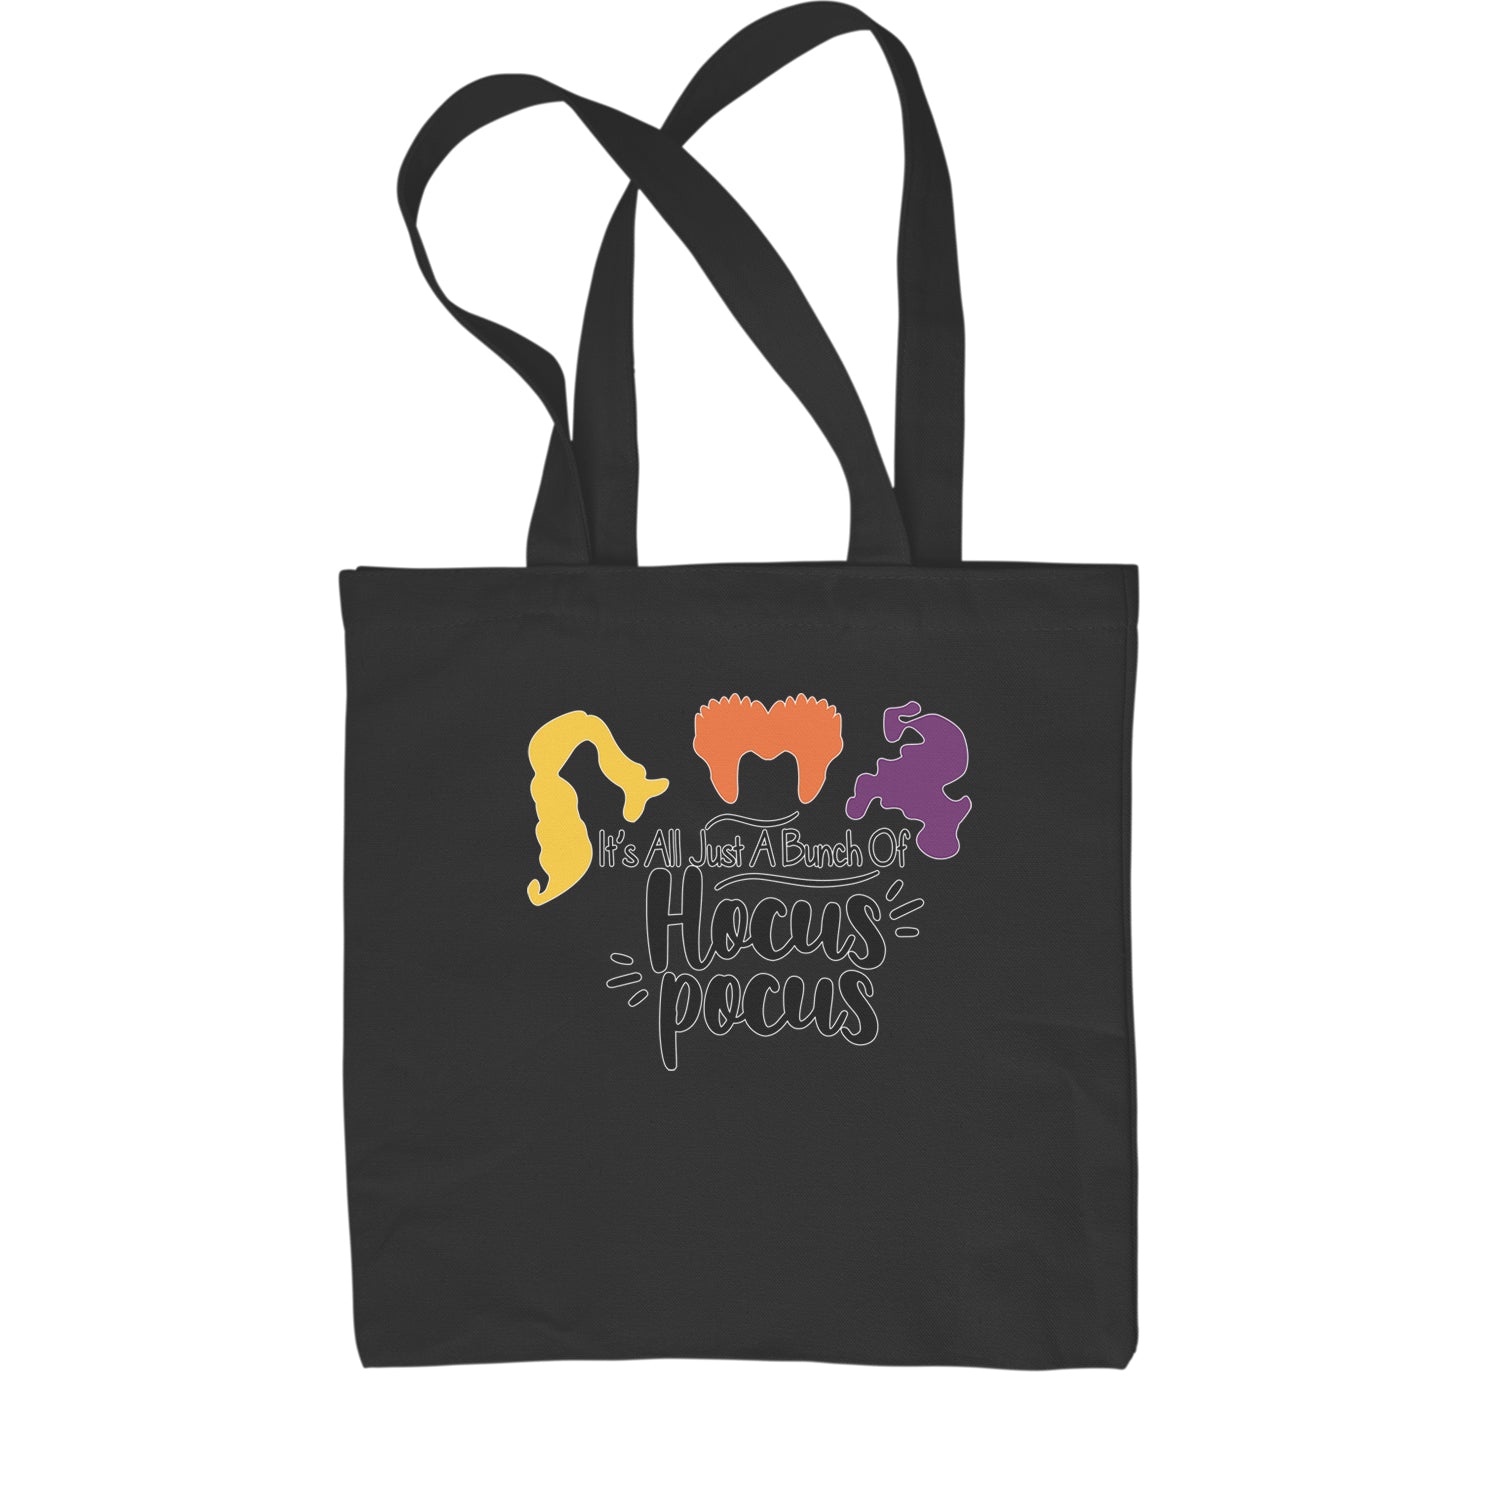 It's Just A Bunch Of Hocus Pocus Shopping Tote Bag descendants, enchanted, eve, hallows, hocus, or, pocus, sanderson, sisters, treat, trick, witches by Expression Tees